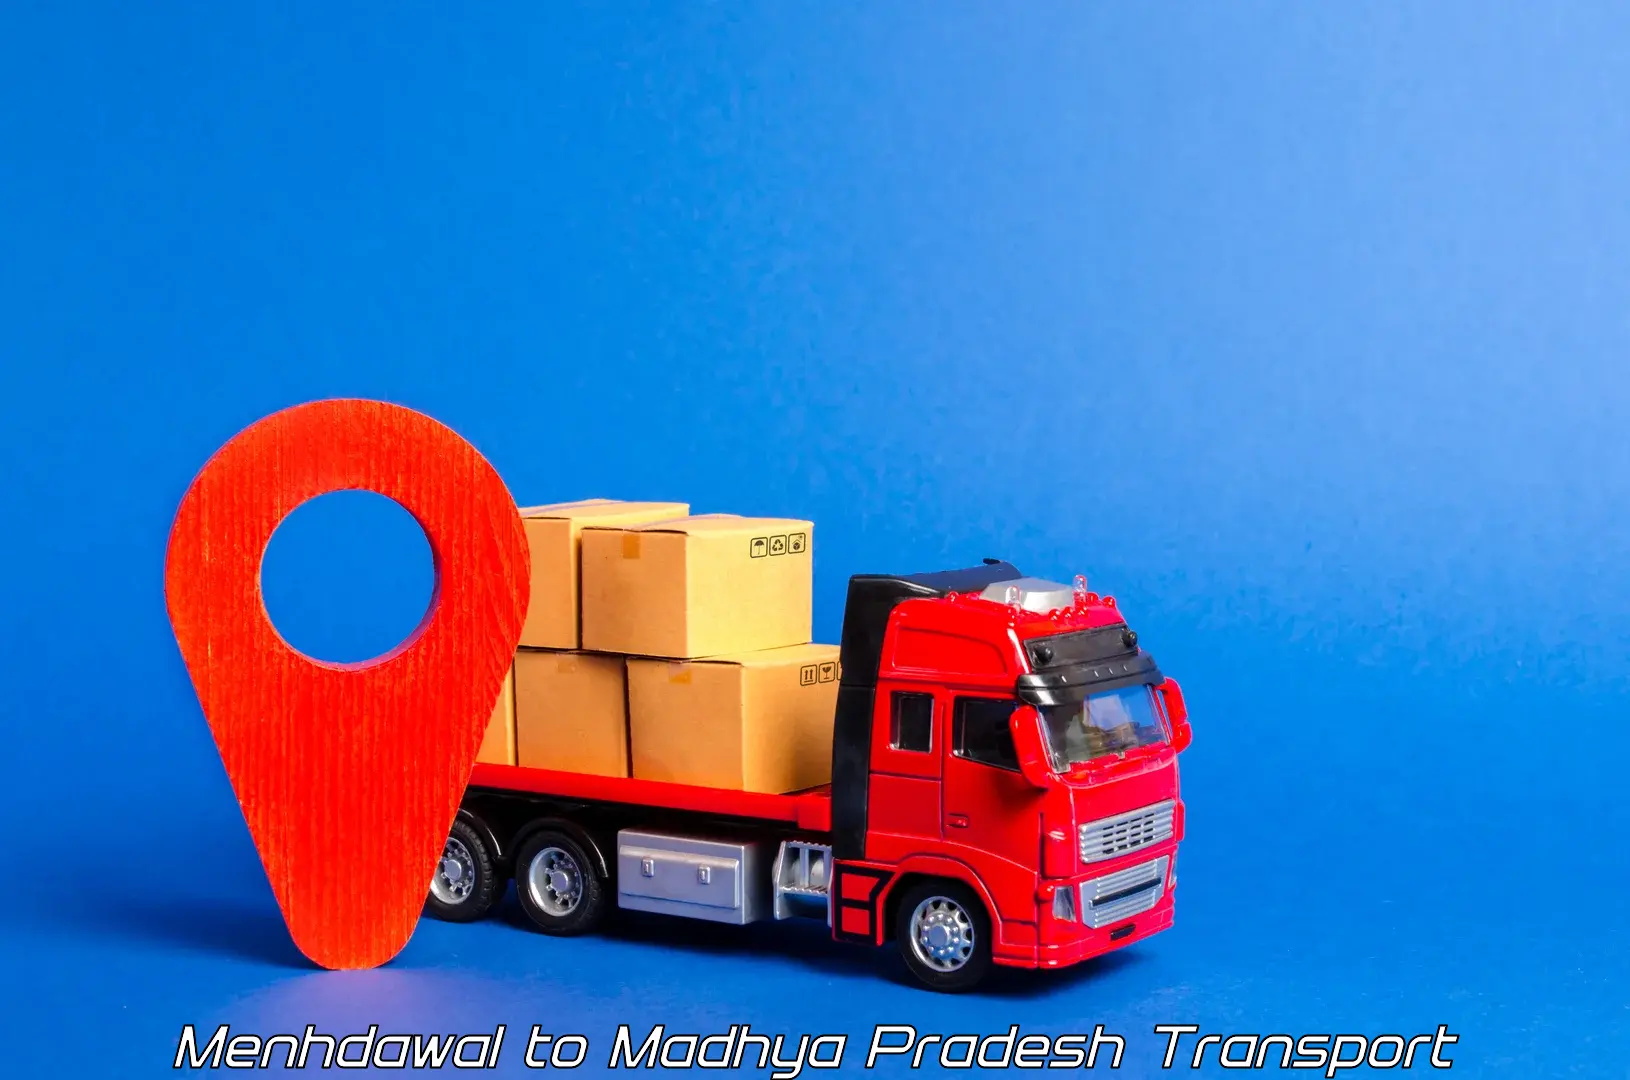 Transport in sharing Menhdawal to Madwas